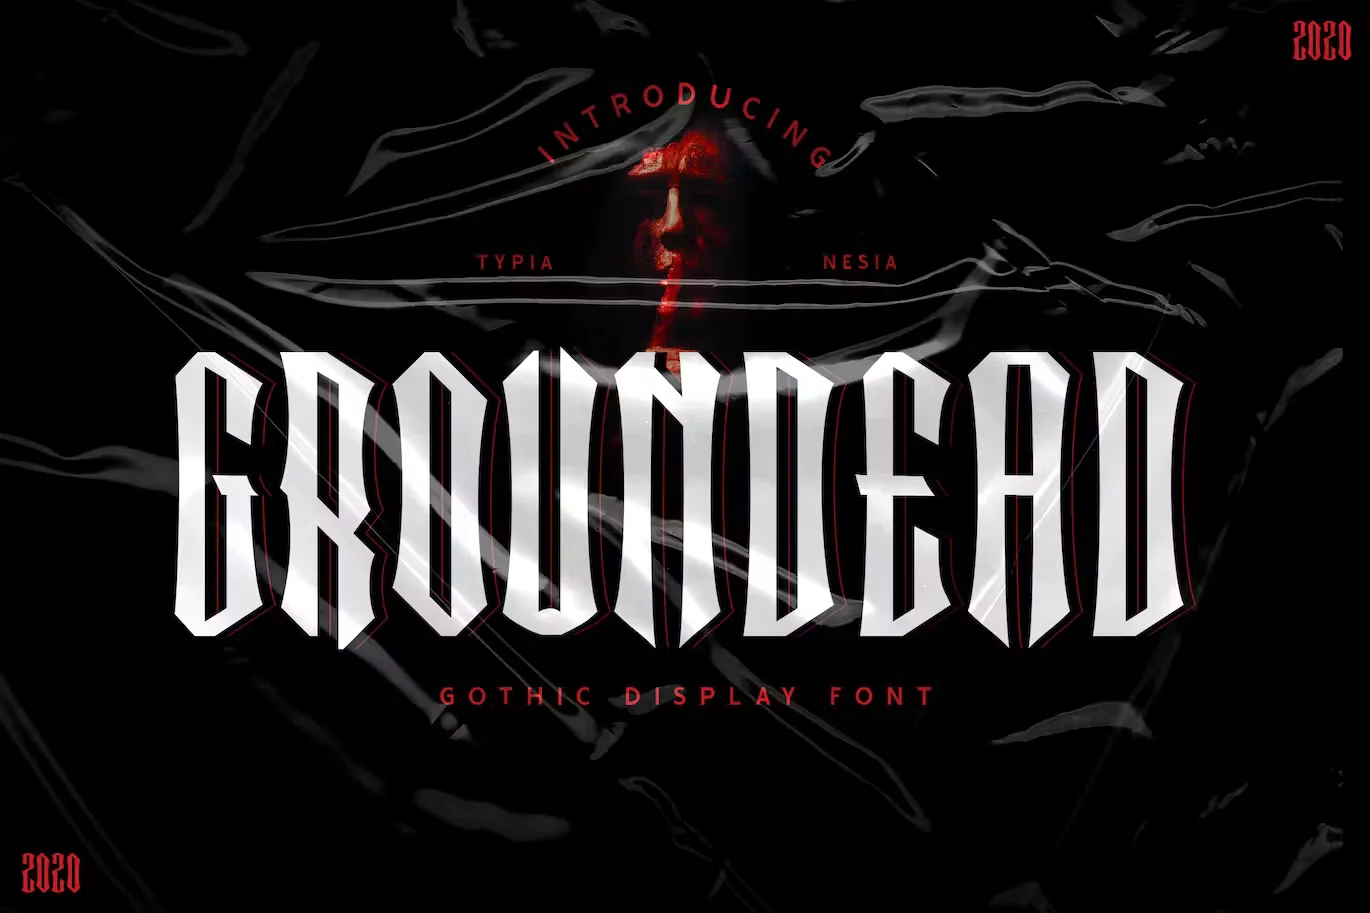 Groundead - Gothic Font